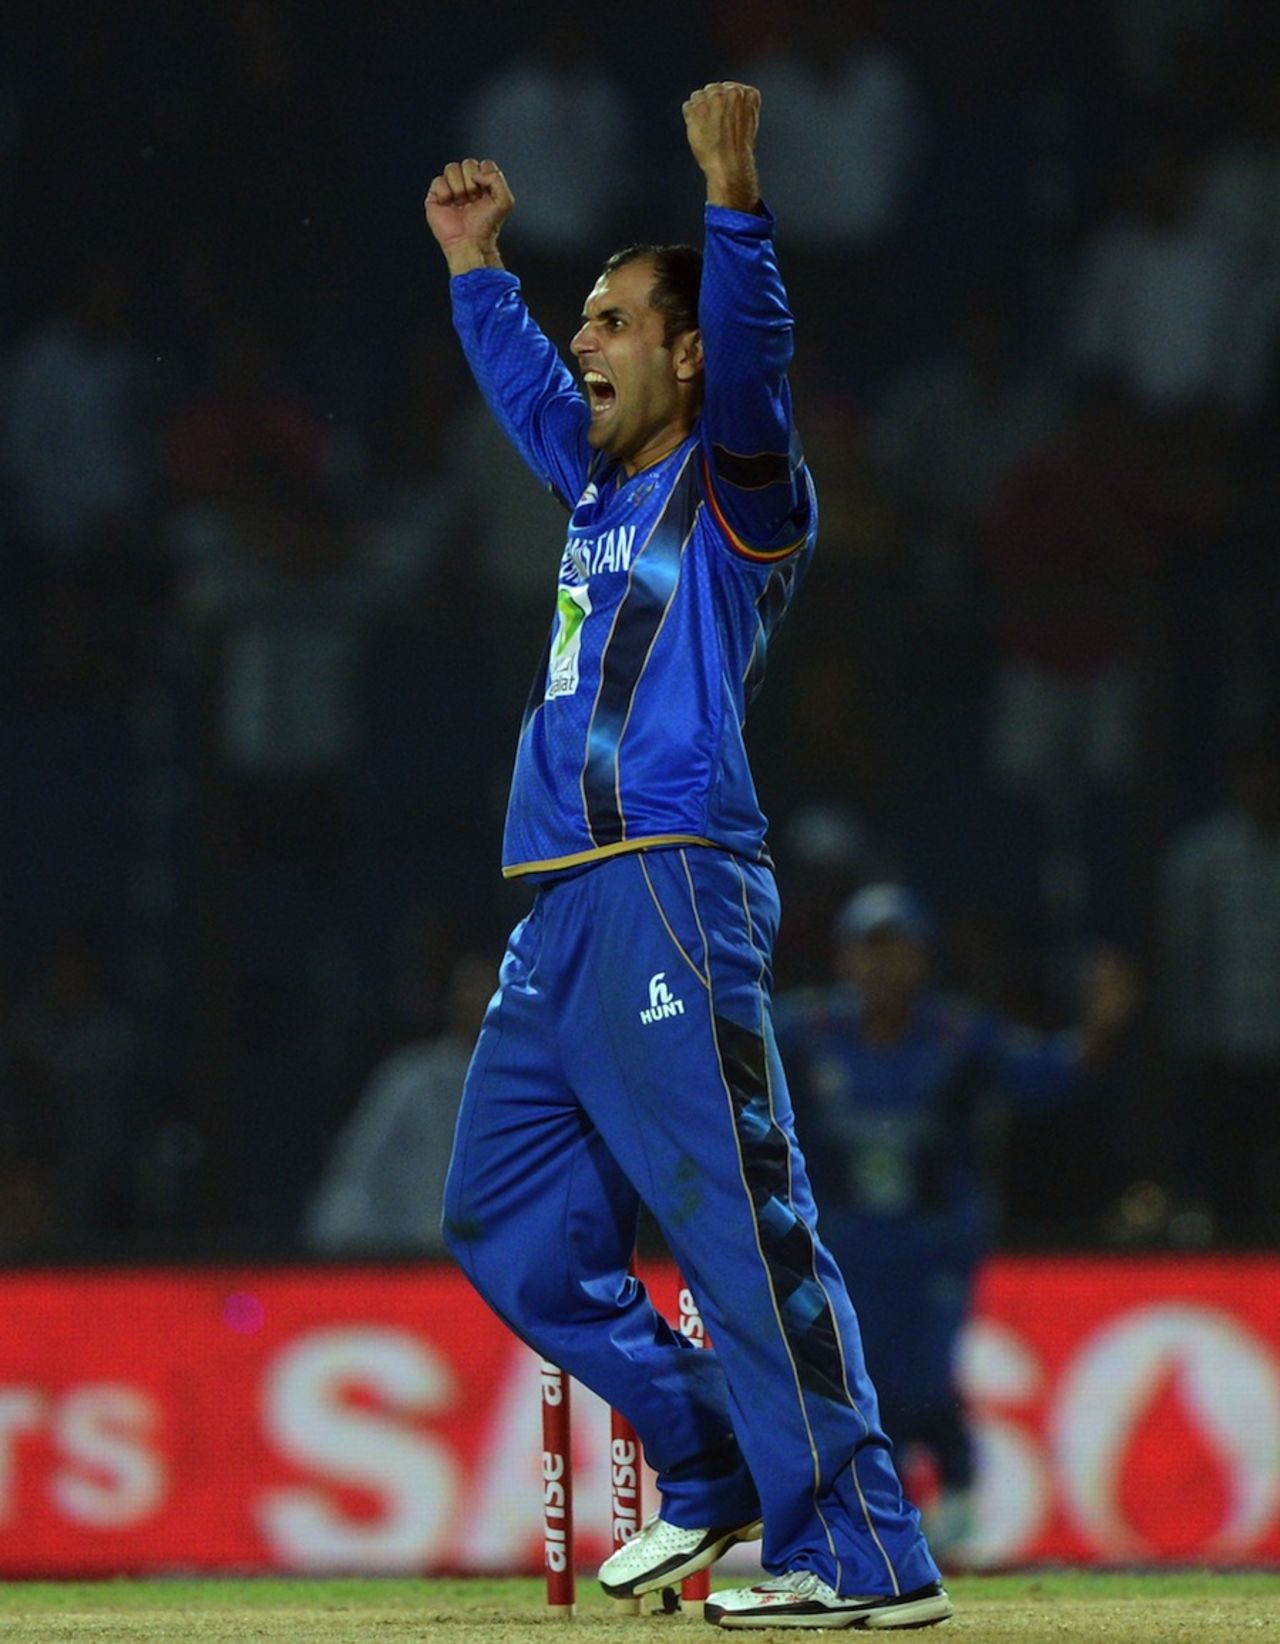 Mohammad Nabi exults after taking the final wicket, Bangladesh v Afghanistan, Asia Cup, Fatullah, March 1, 2014